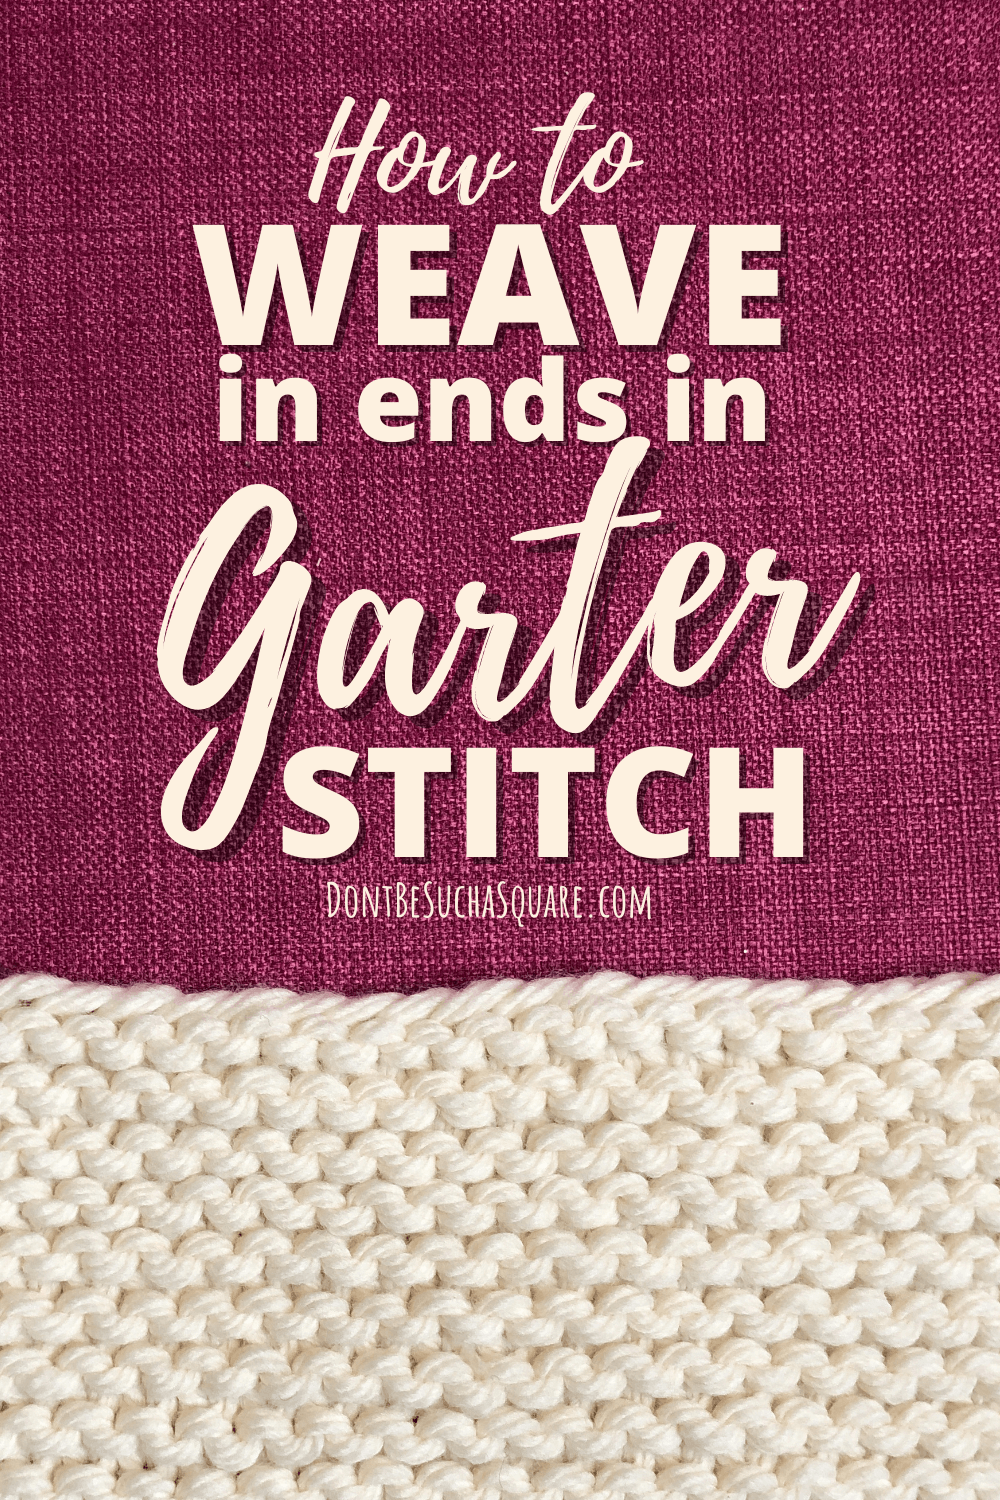 A piece of garter stitch knitting laying on a dark pink  woven fabric. The text "How to weave in ends in garter stitch" appears in white over the fabric